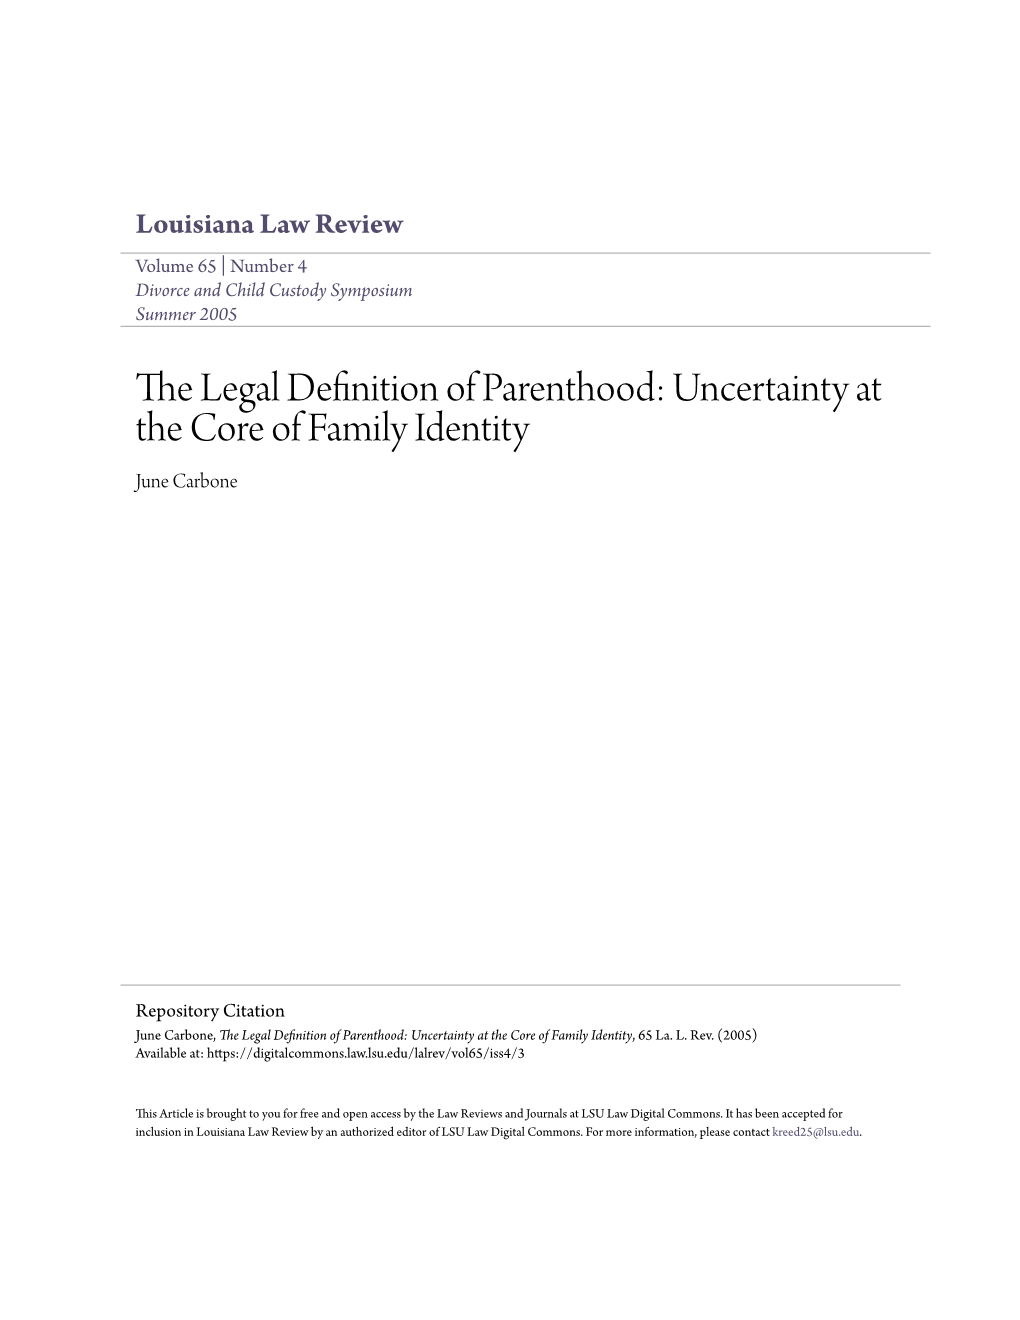 The Legal Definition of Parenthood: Uncertainty at the Core of Family Identity June Carbone